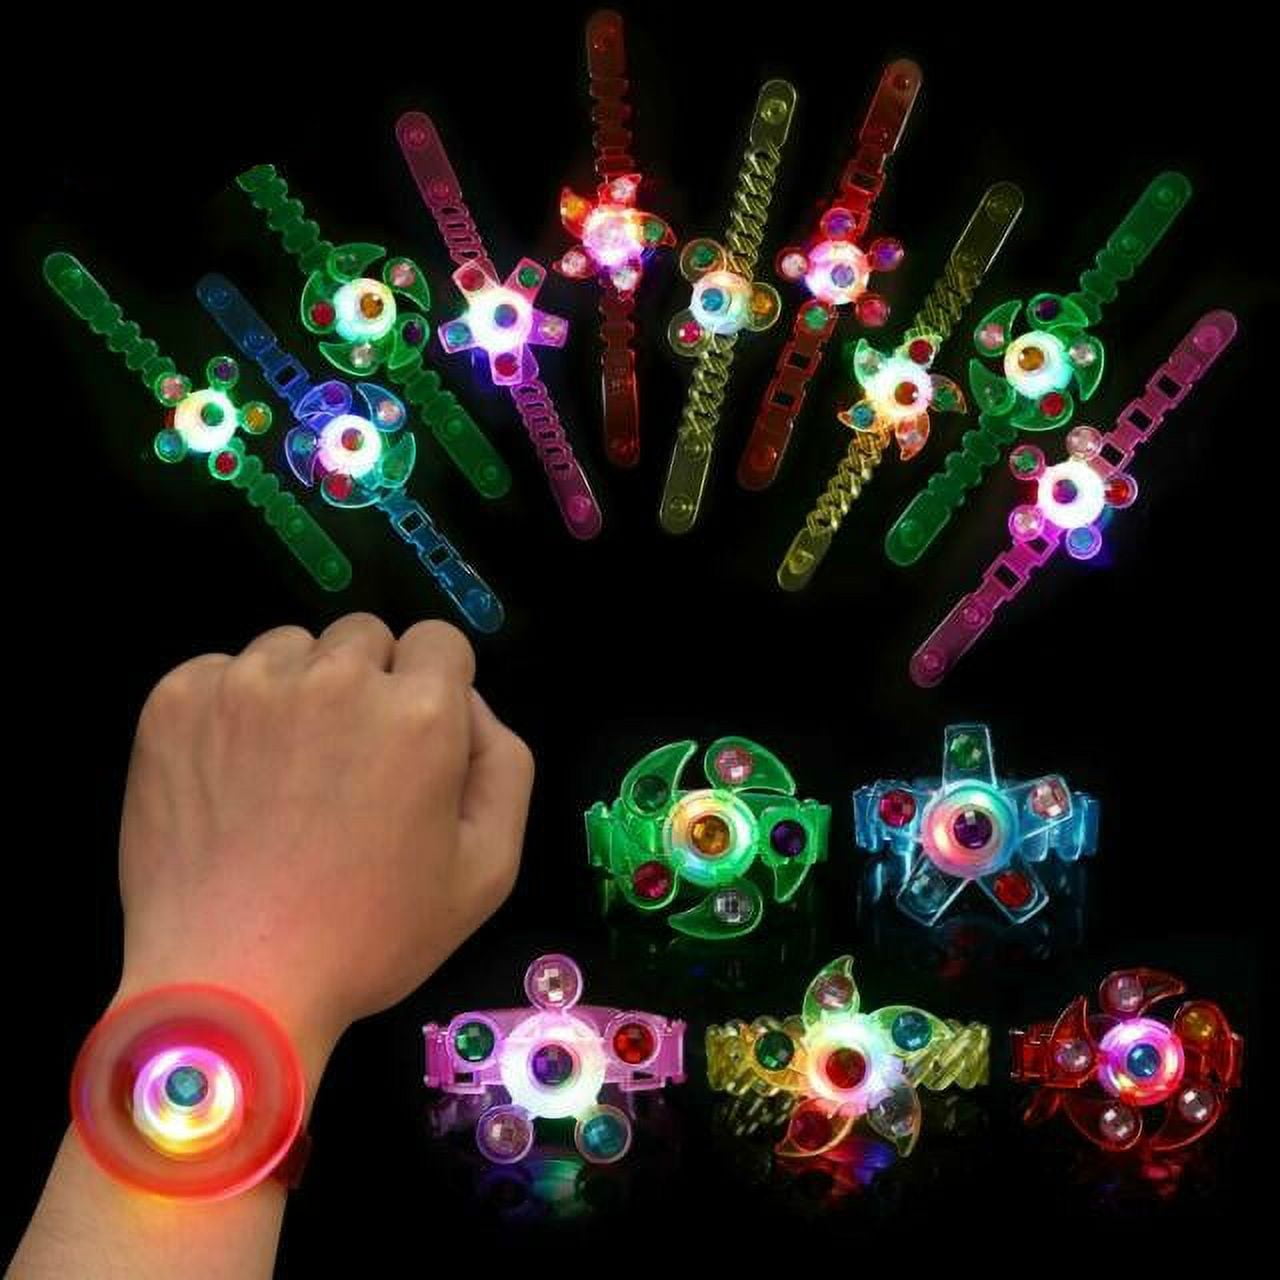 Turnmeon 20Pack Glow Sticks Bracelet Easter Party Favors For Kids,Led Light  Up Bracelet Glow In The Dark Party Supplies For Adults Kids Neon Birthdays  Carnival Party Light Up Toys 